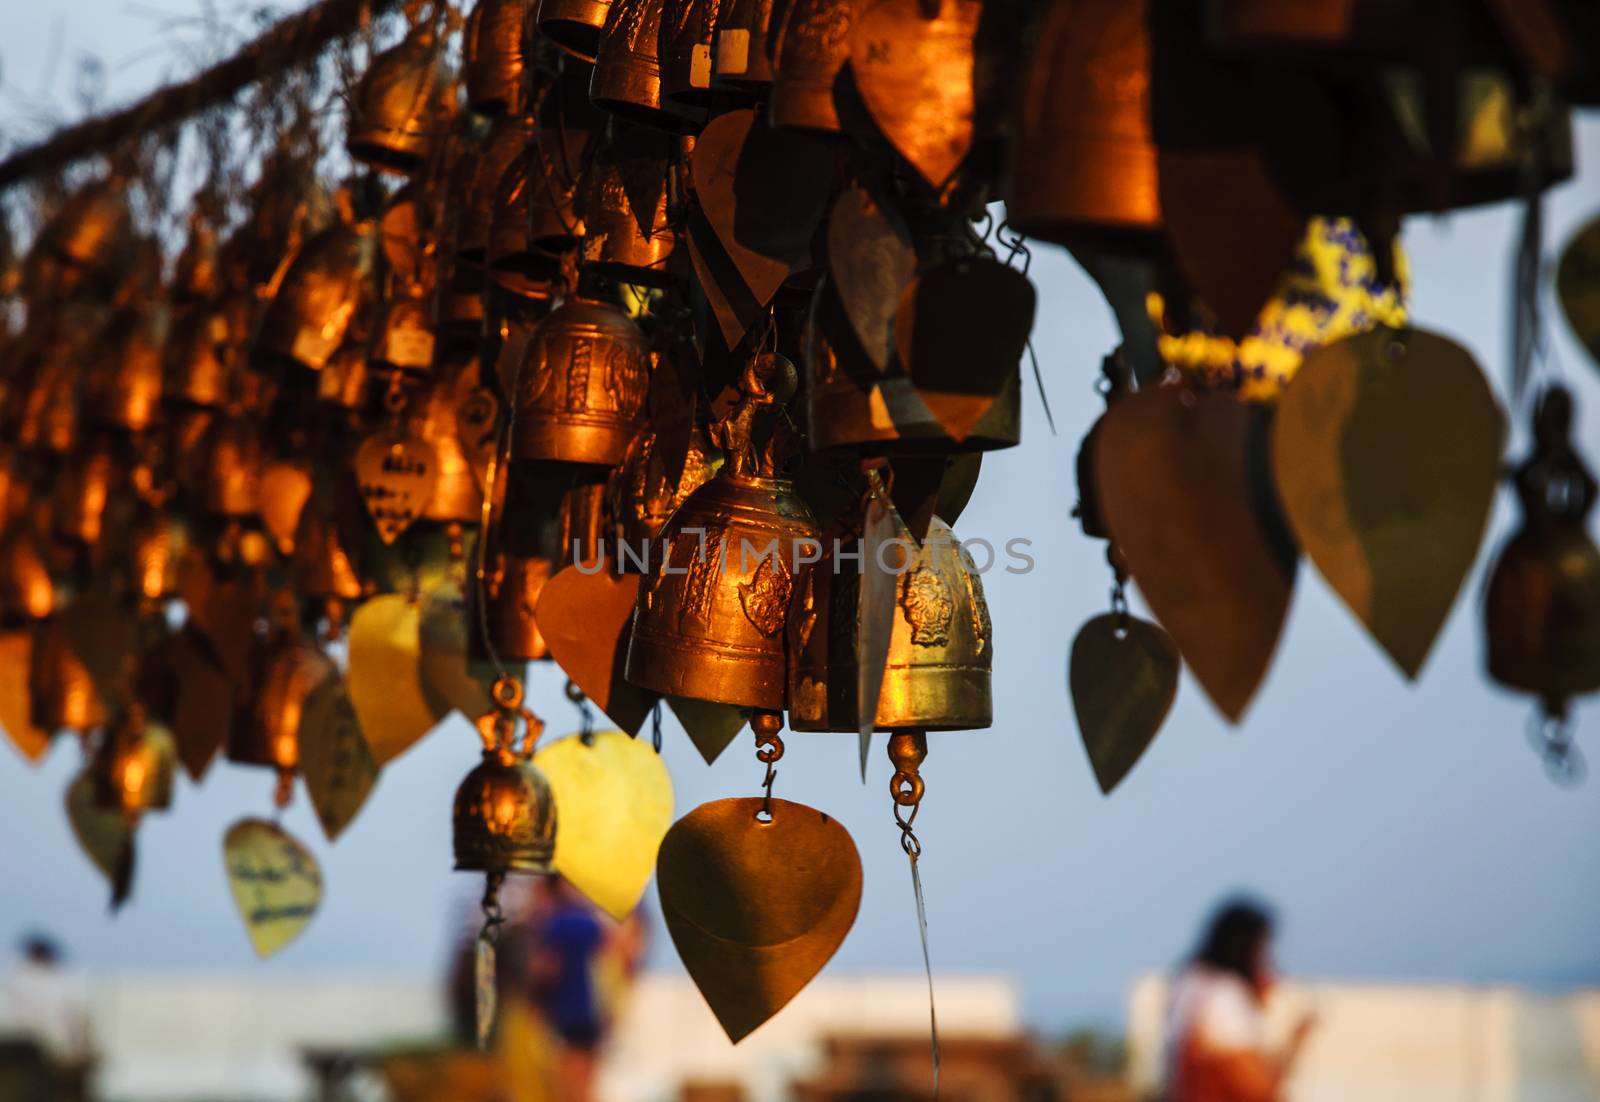 Bell of love, Bell of believe with color of sunlight